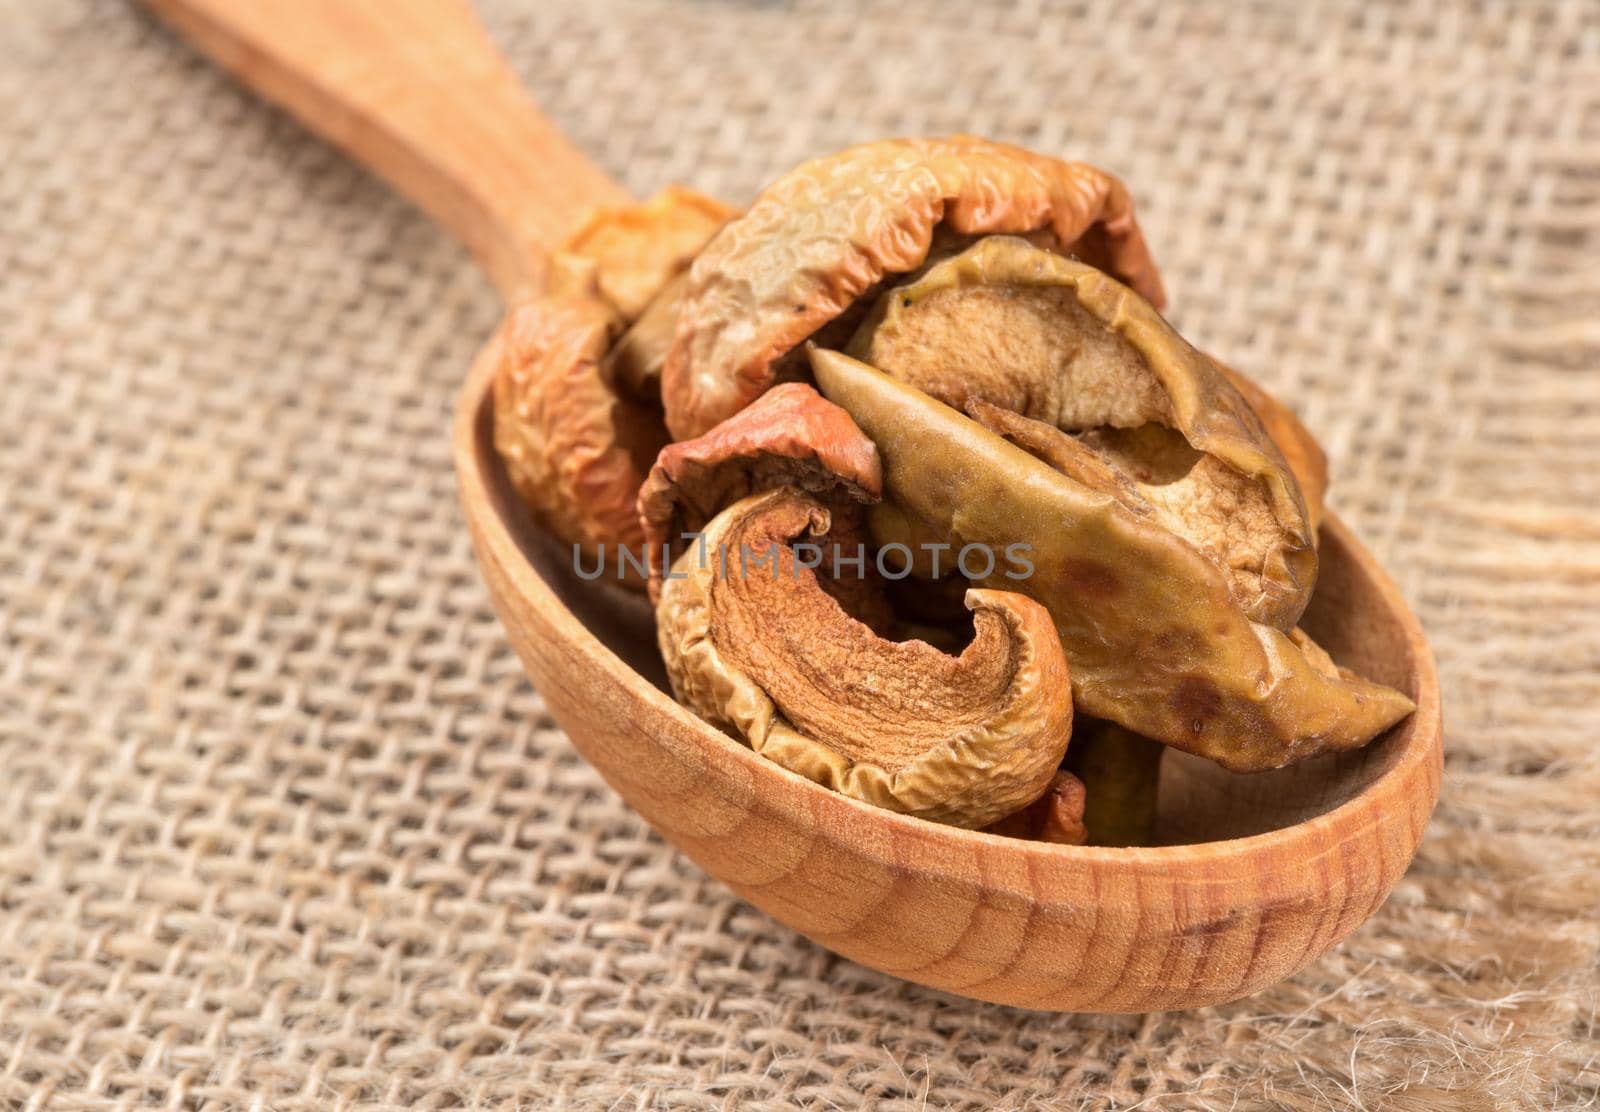 Wooden spoon filled with dry apple slices closeup on burlap